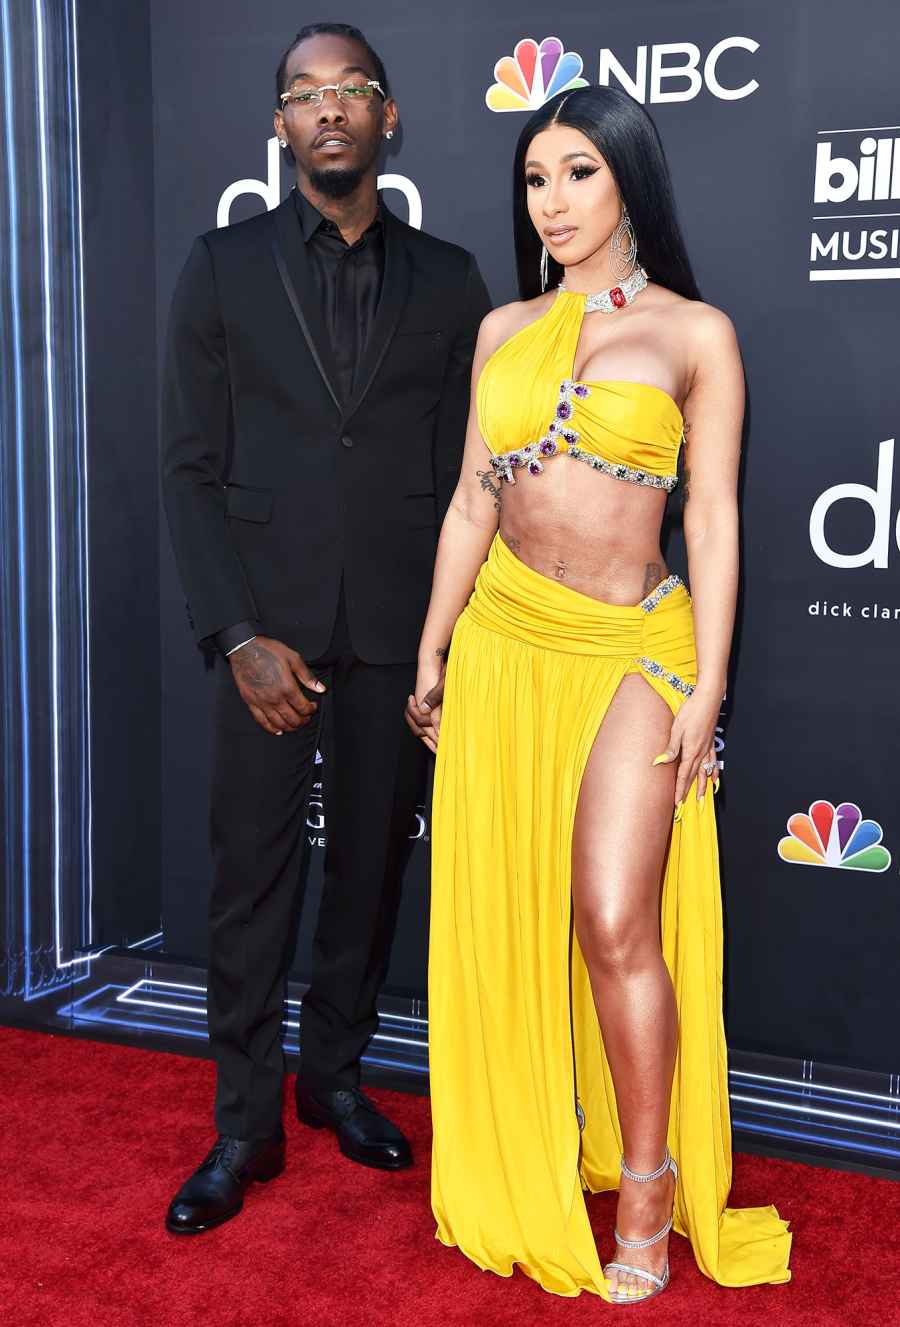 See the Hottest Couples at the BBMAs Offset and Cardi B